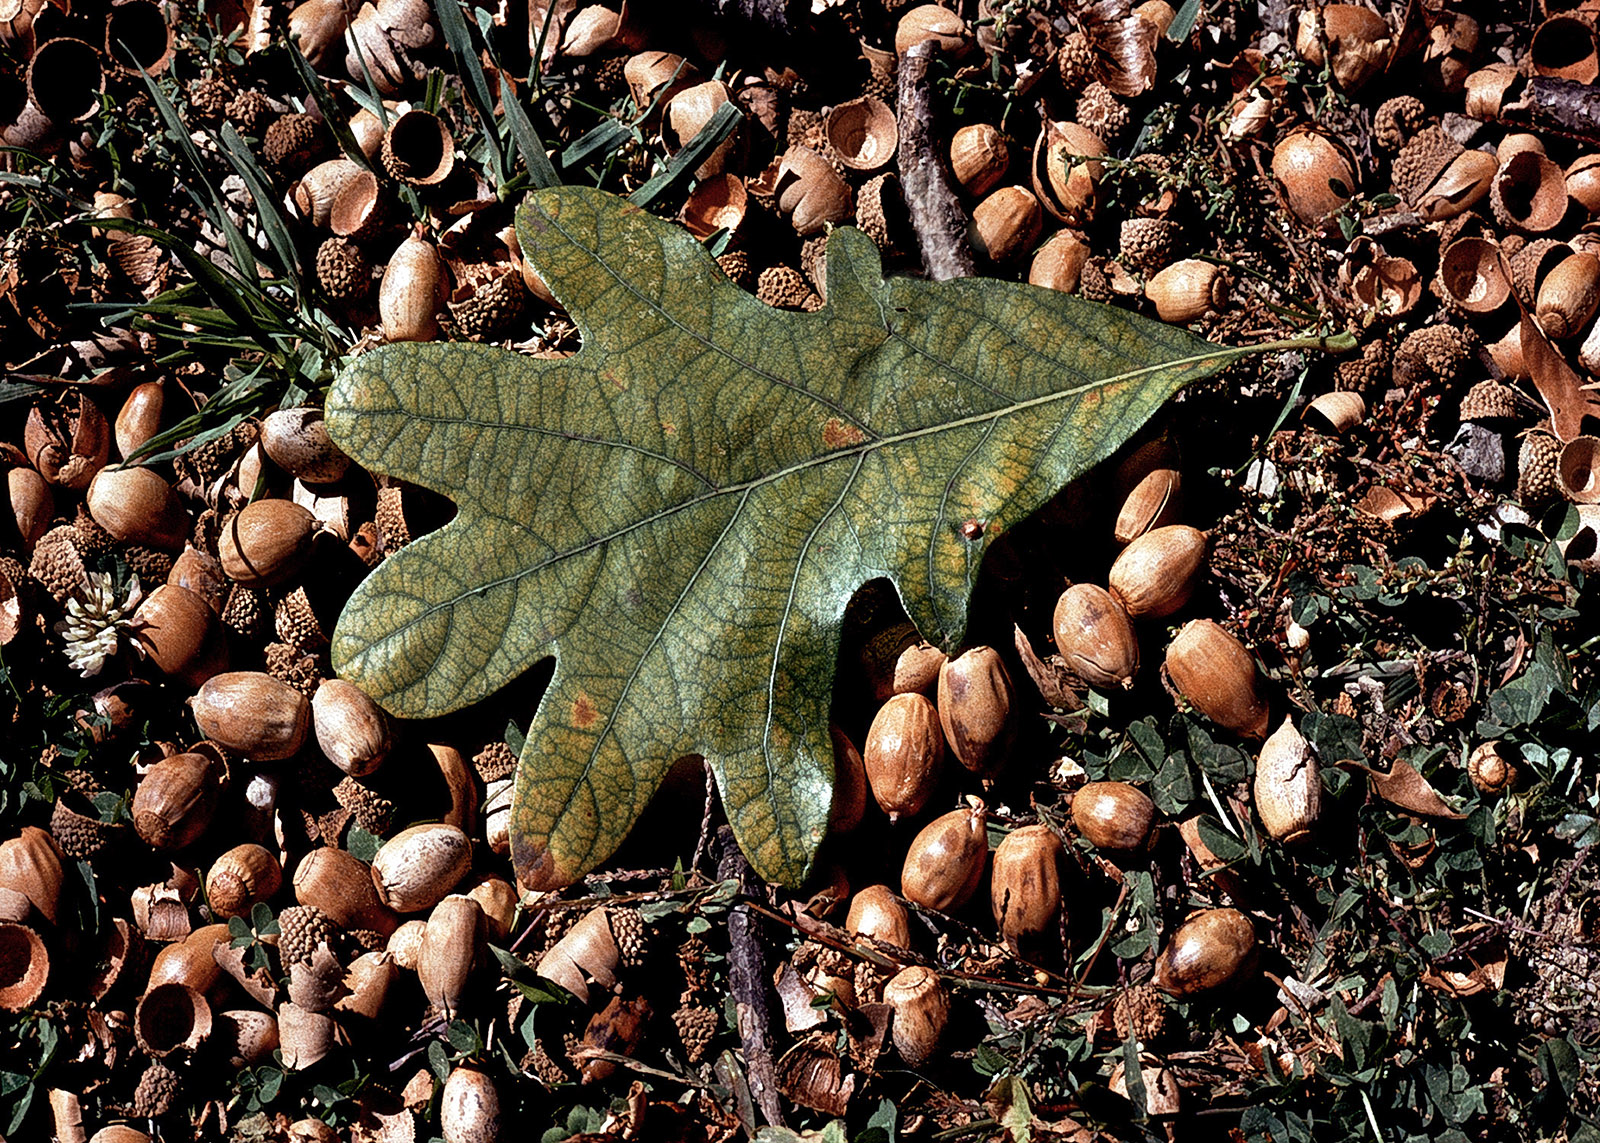 A photo of a white oak leaf on the ground surrounded by white oak acorns.